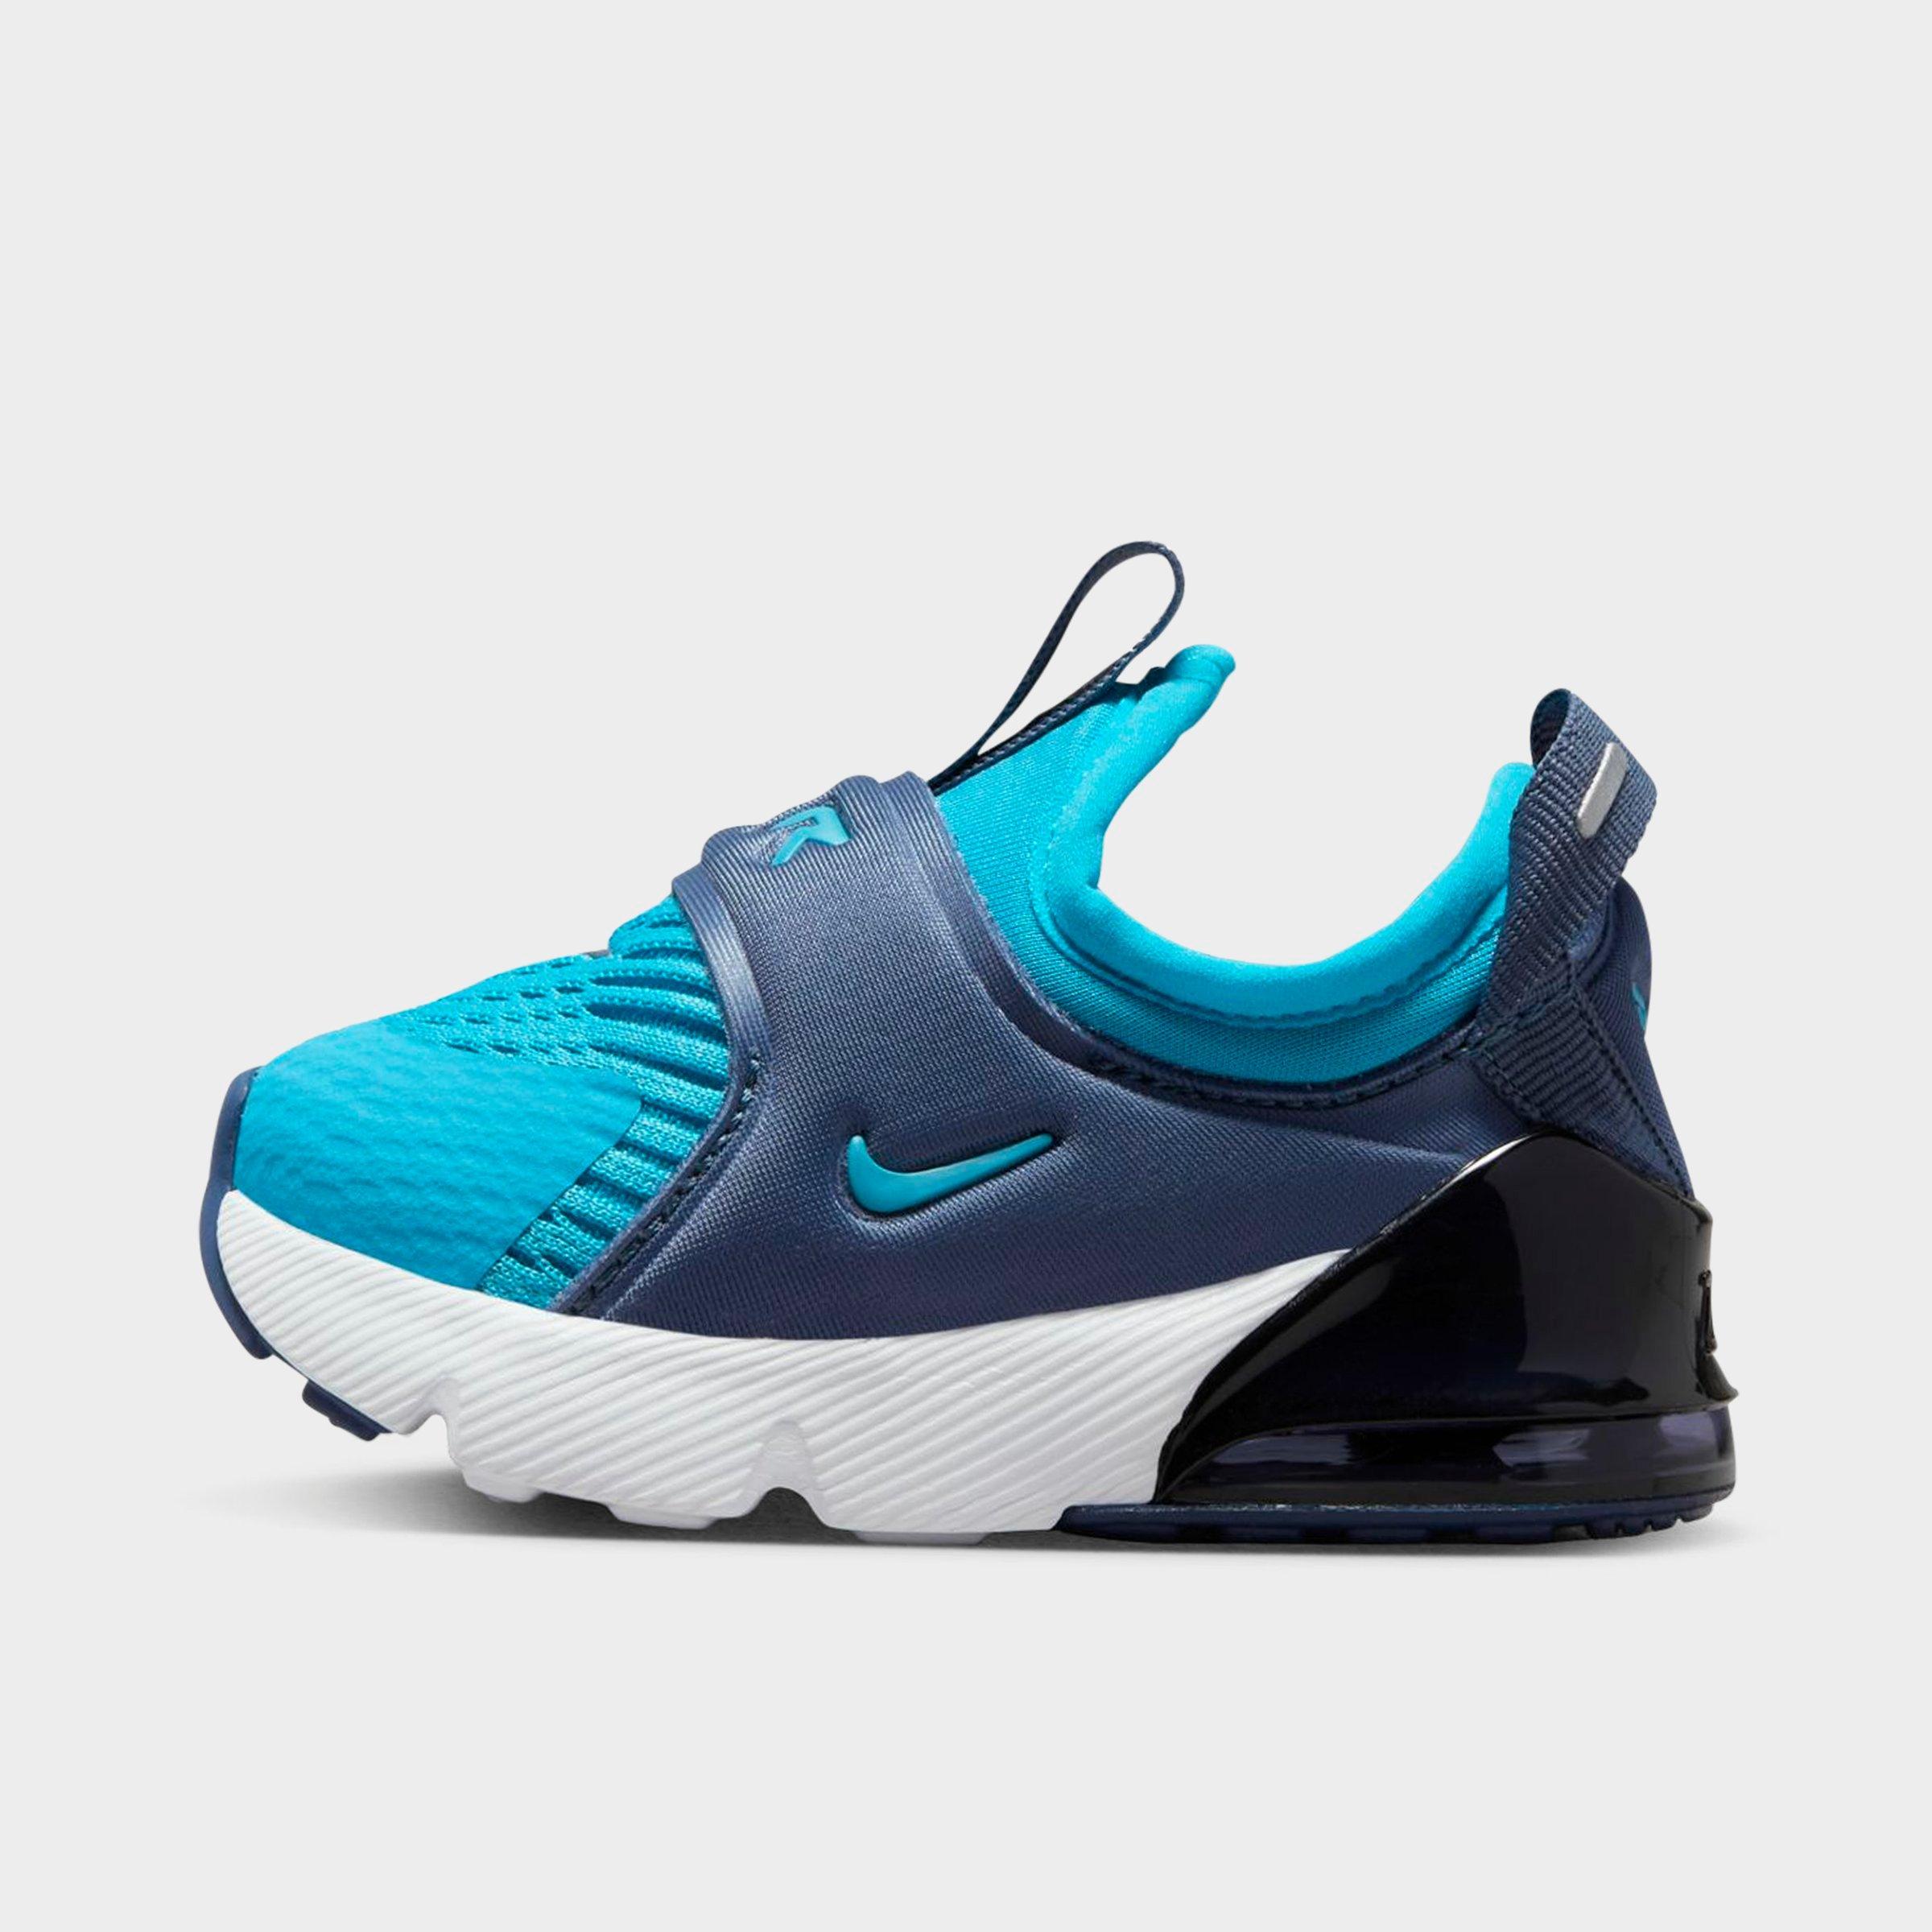 Nike Air Max 270 Extreme Baby/toddler Shoes In Diffused Blue/blue Lightning/white/midnight Navy